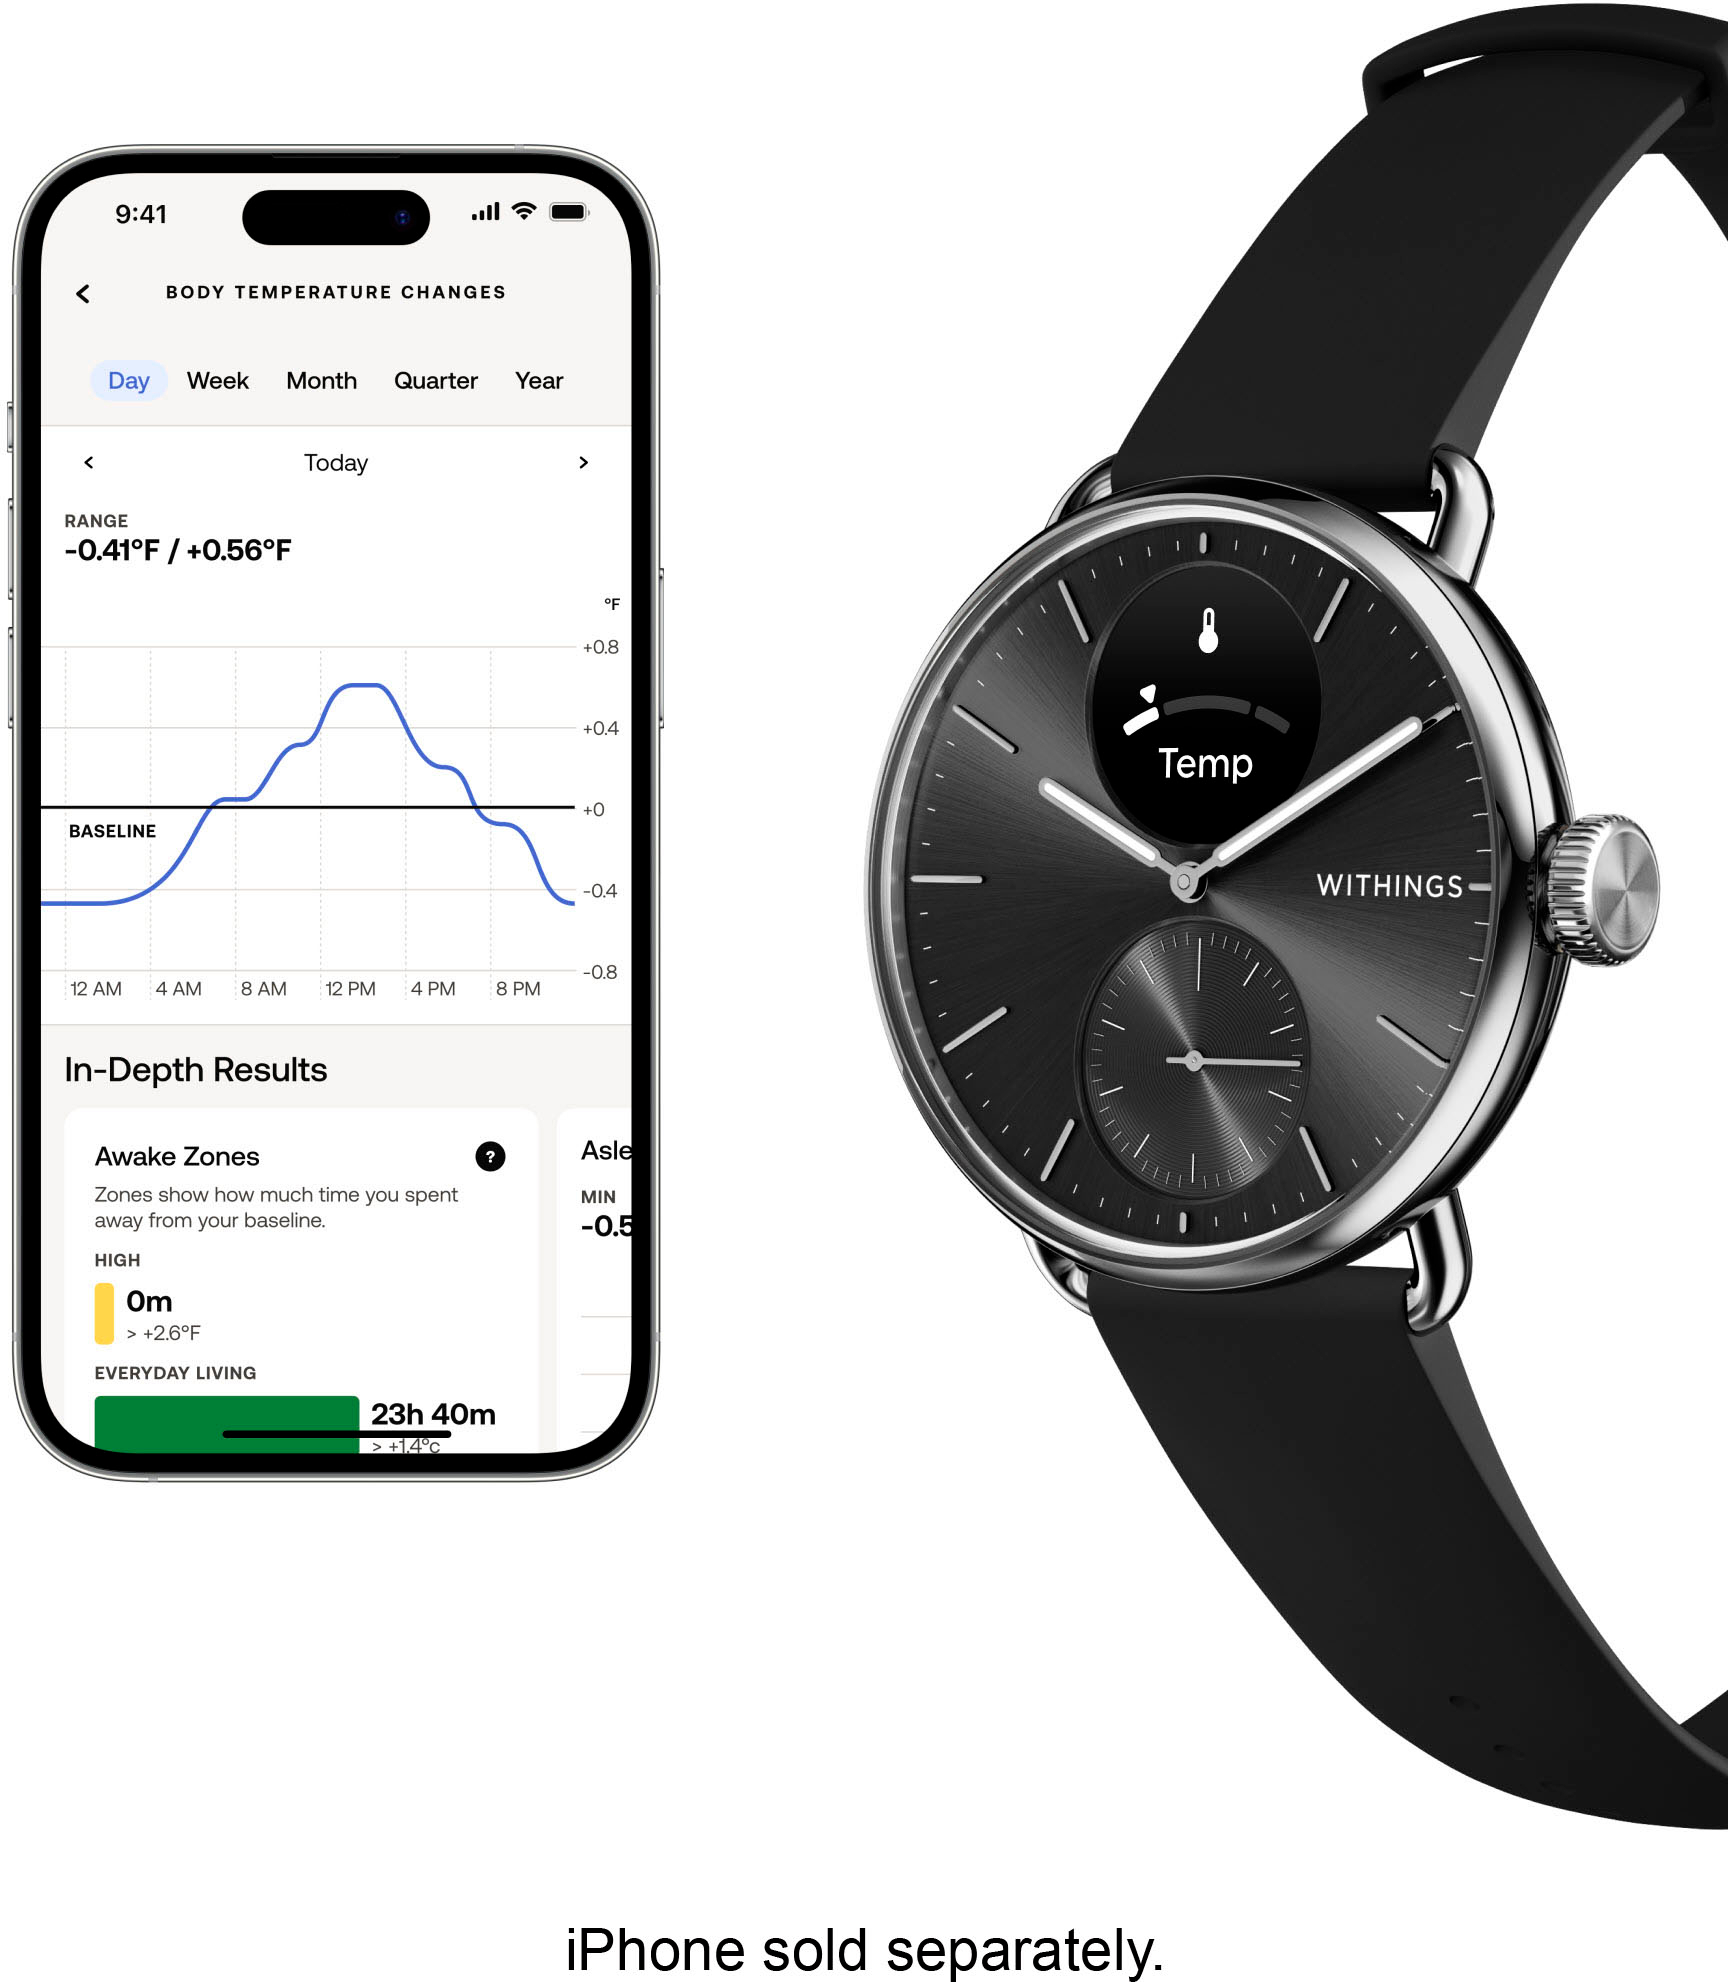 ScanWatch 2: 38 vs 42 : r/withings